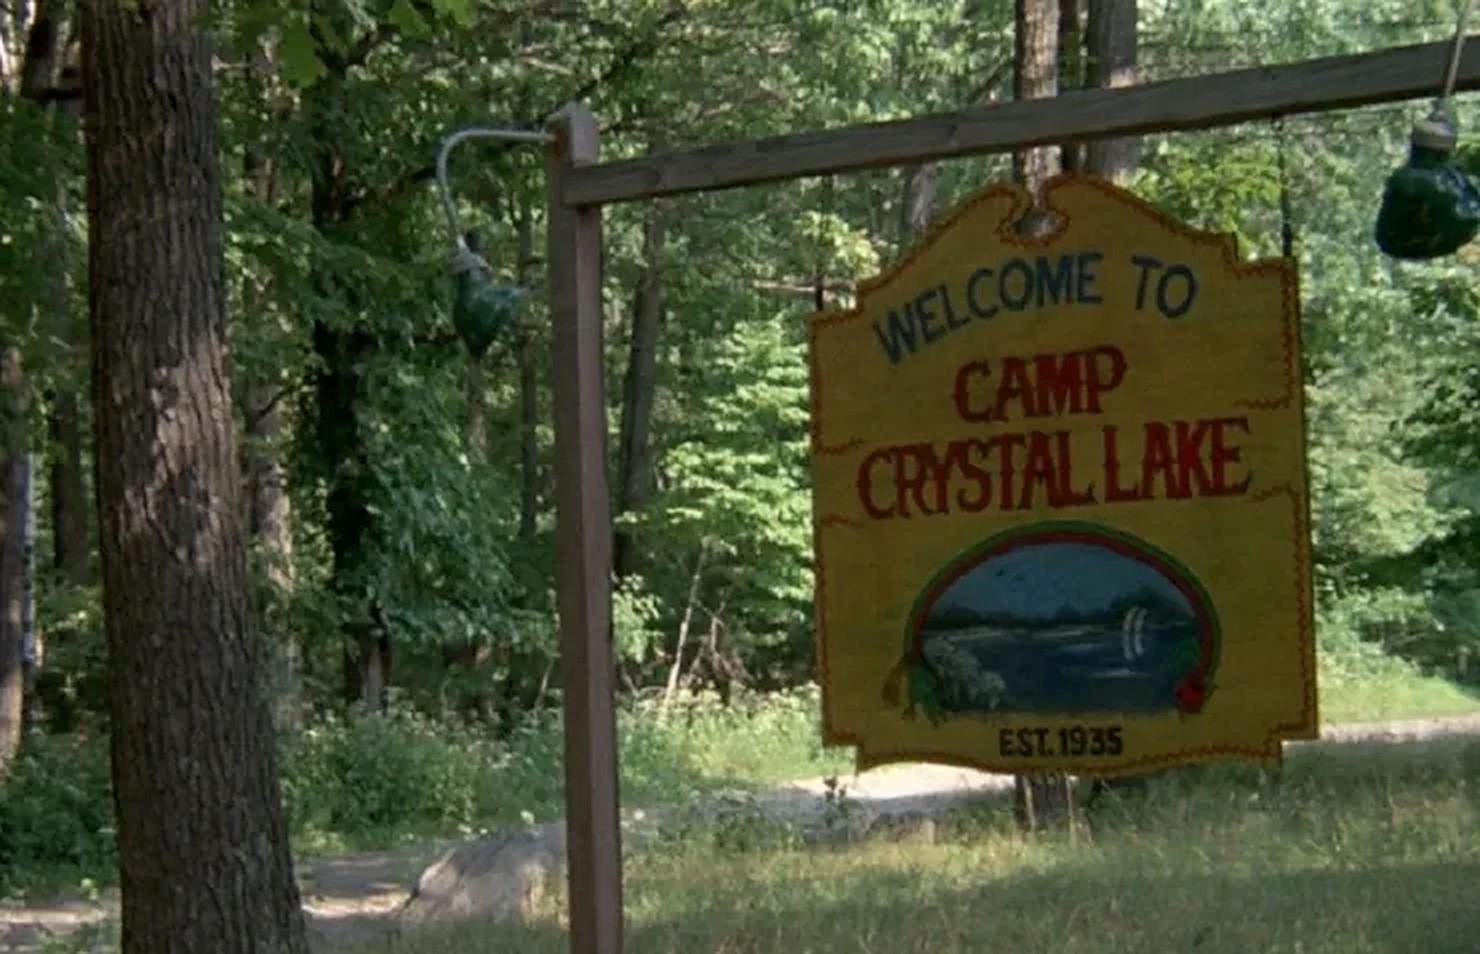 A24 to produce 'Friday the 13th' prequel series, 'Crystal Lake'